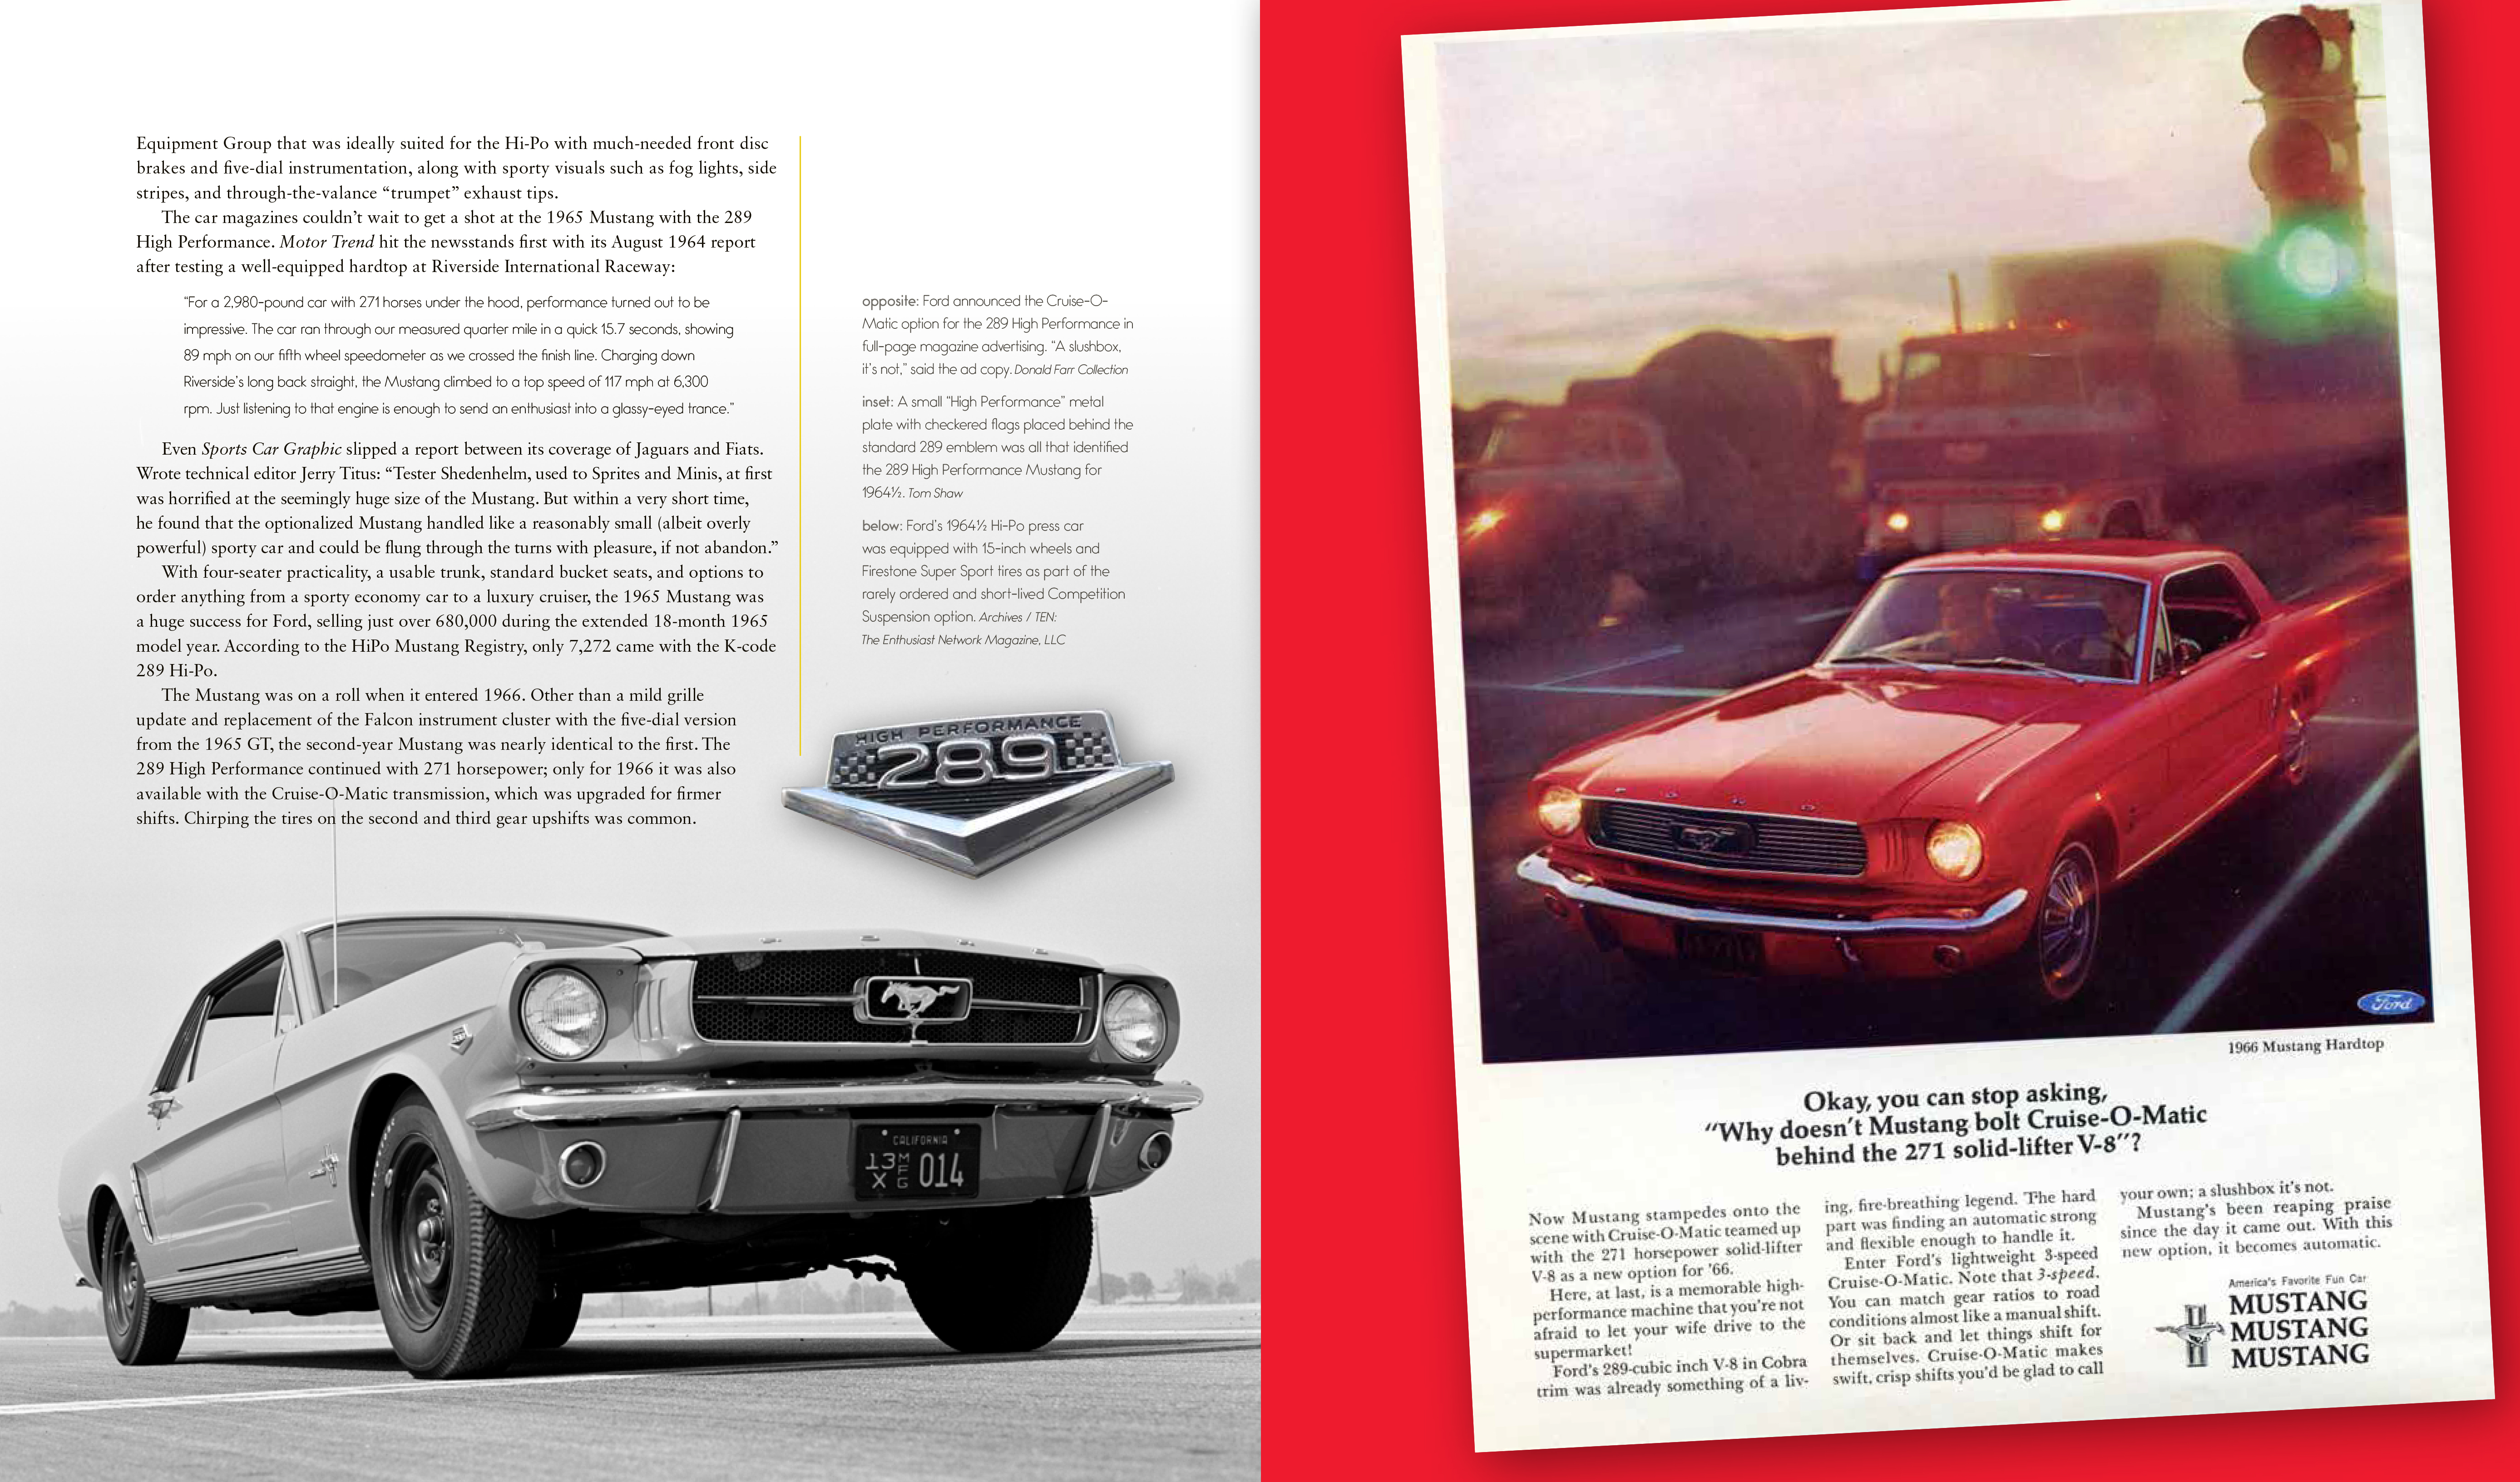 The Complete Book of Classic Ford and Mercury Muscle Cars